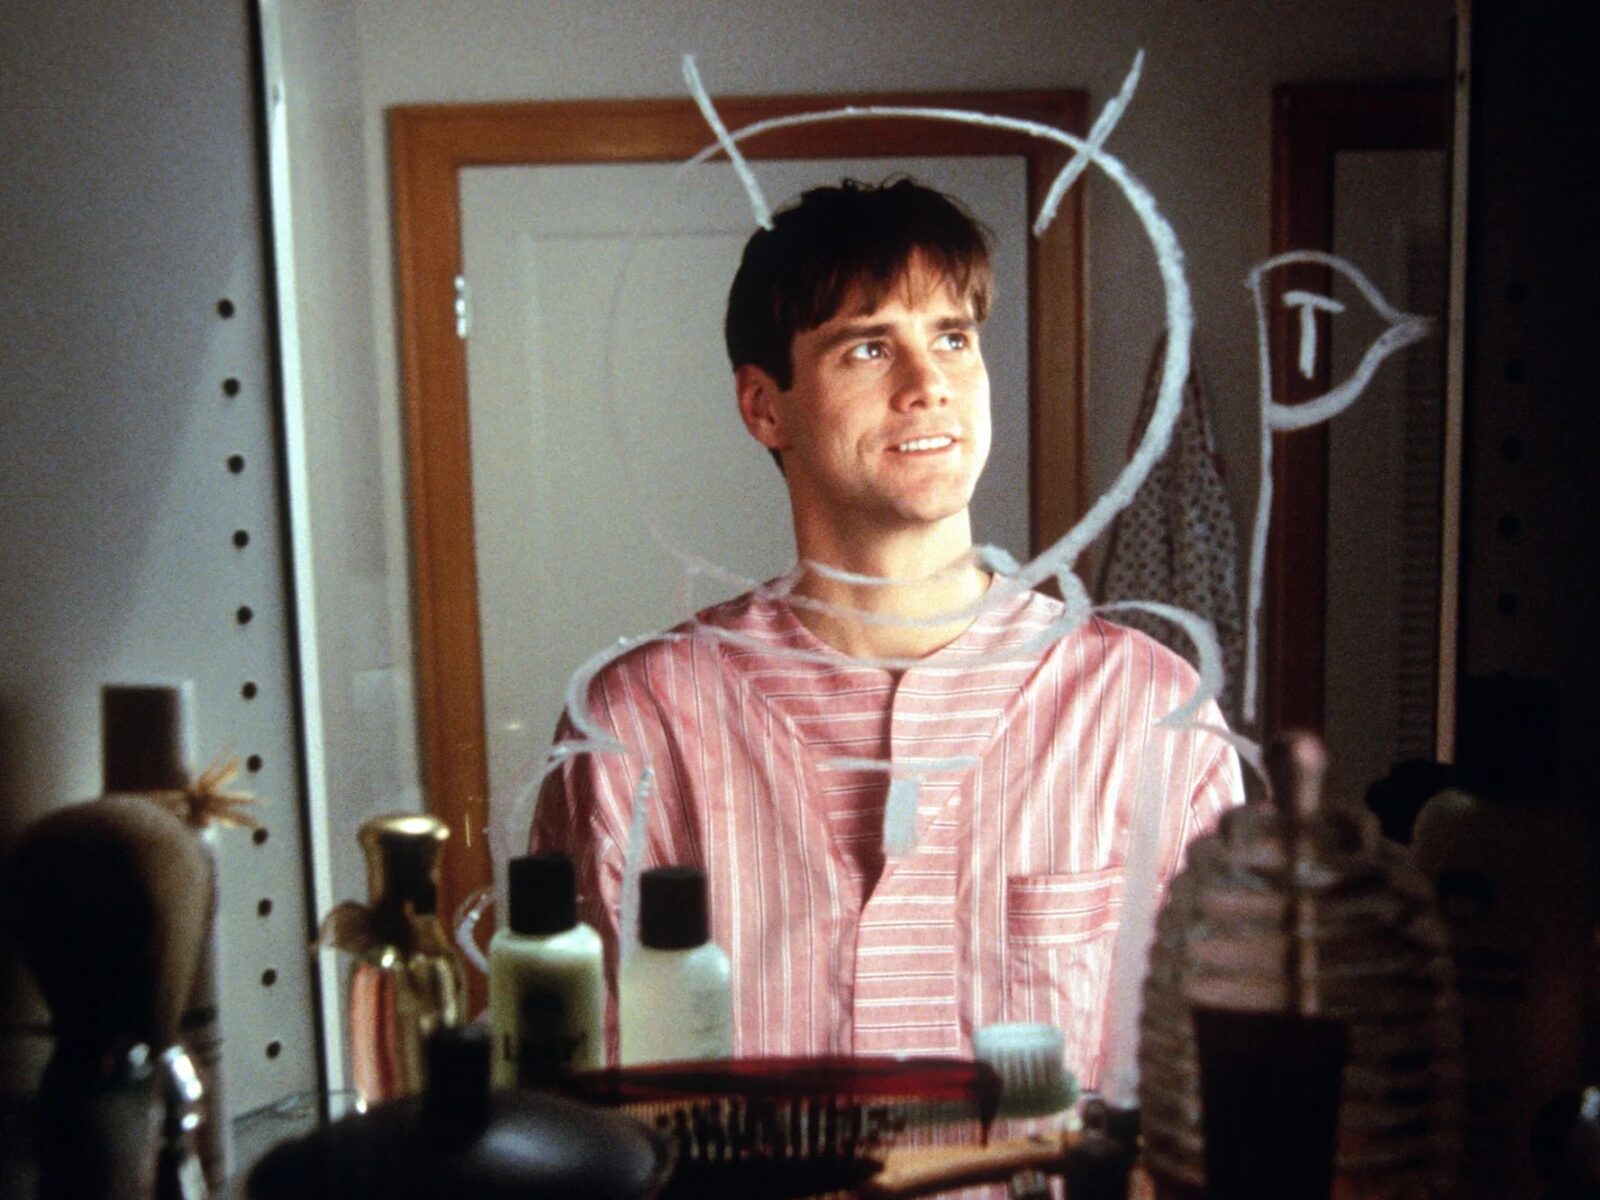 How Many of These Classic 90s Movies Can You Identify from Just One Image? The Truman Show